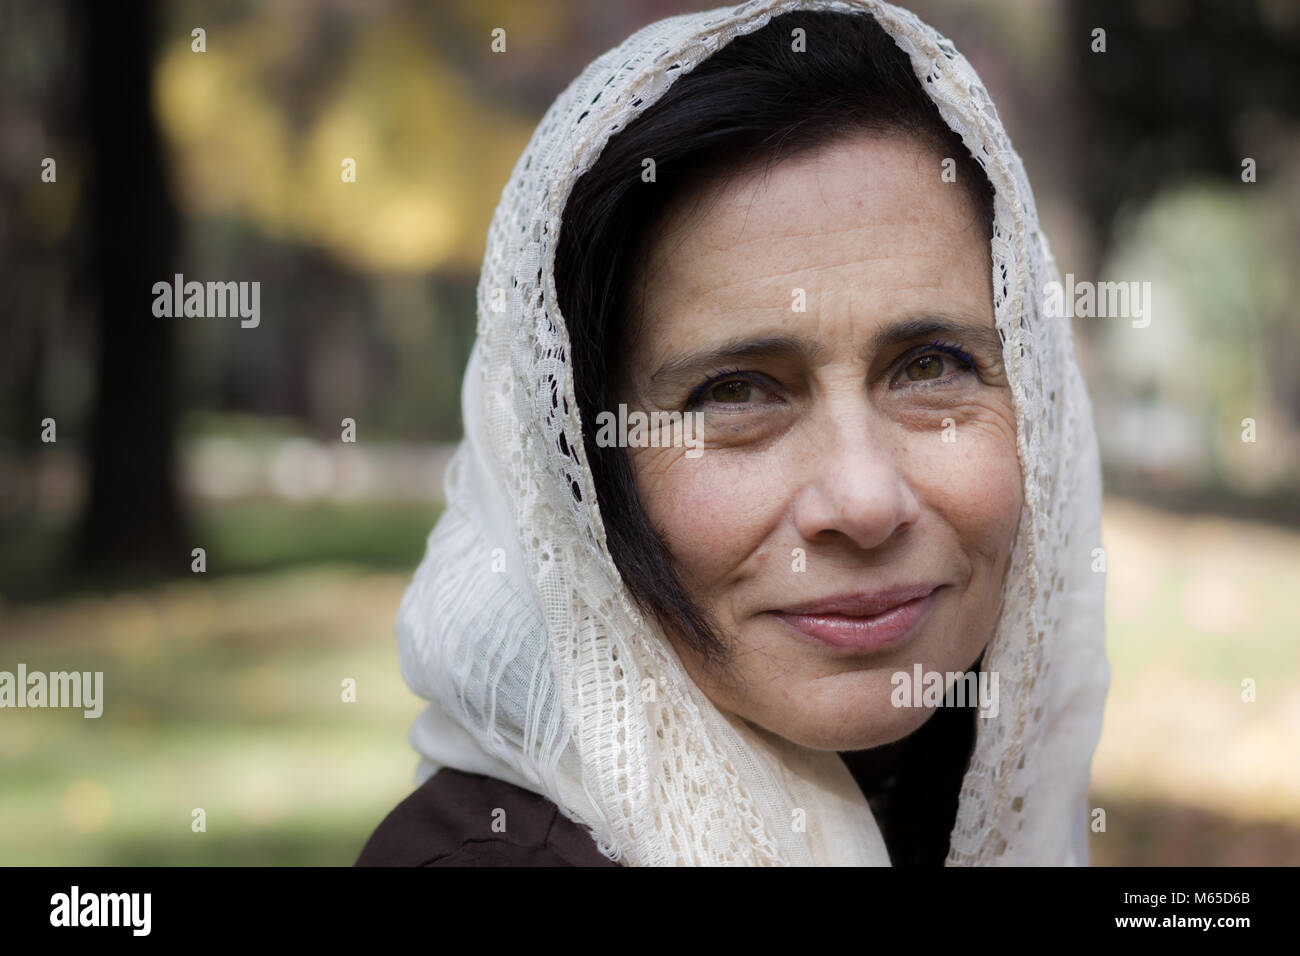 Portrait of mature woman covering her head with hijab style white shawl in the park. Young looking woman with white veil over head, Muslim look Stock Photo